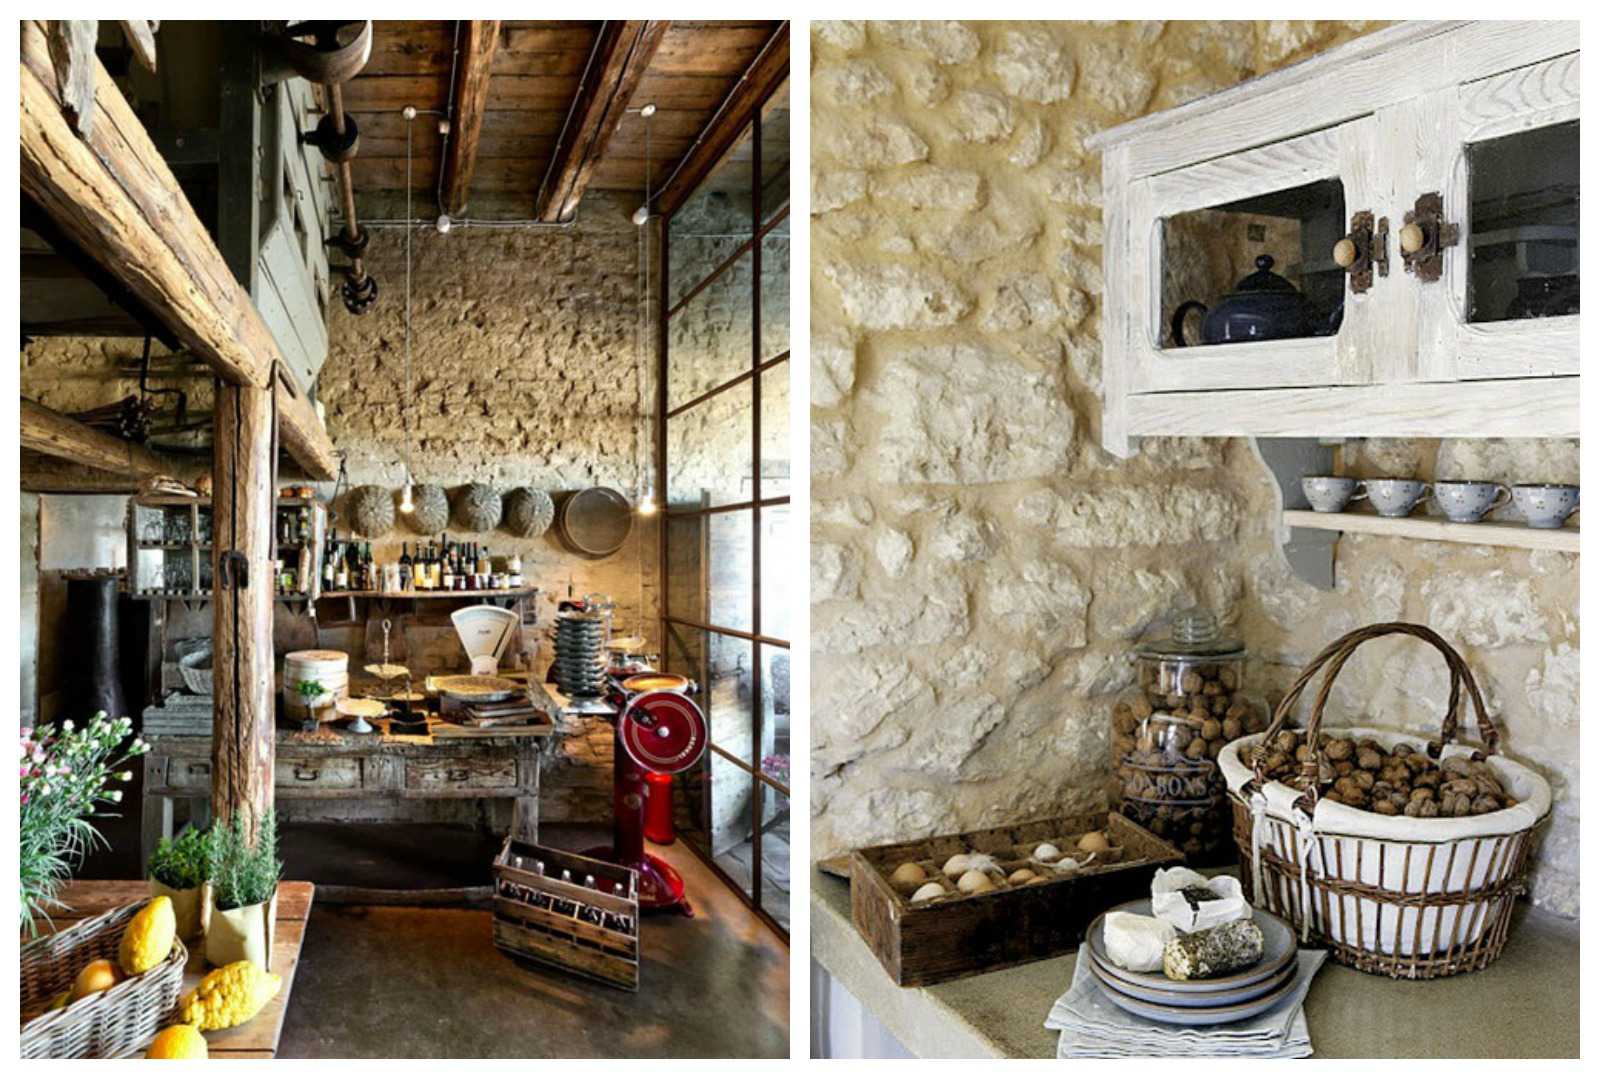 Rustic Italian Kitchen - an update - Renovating Italy